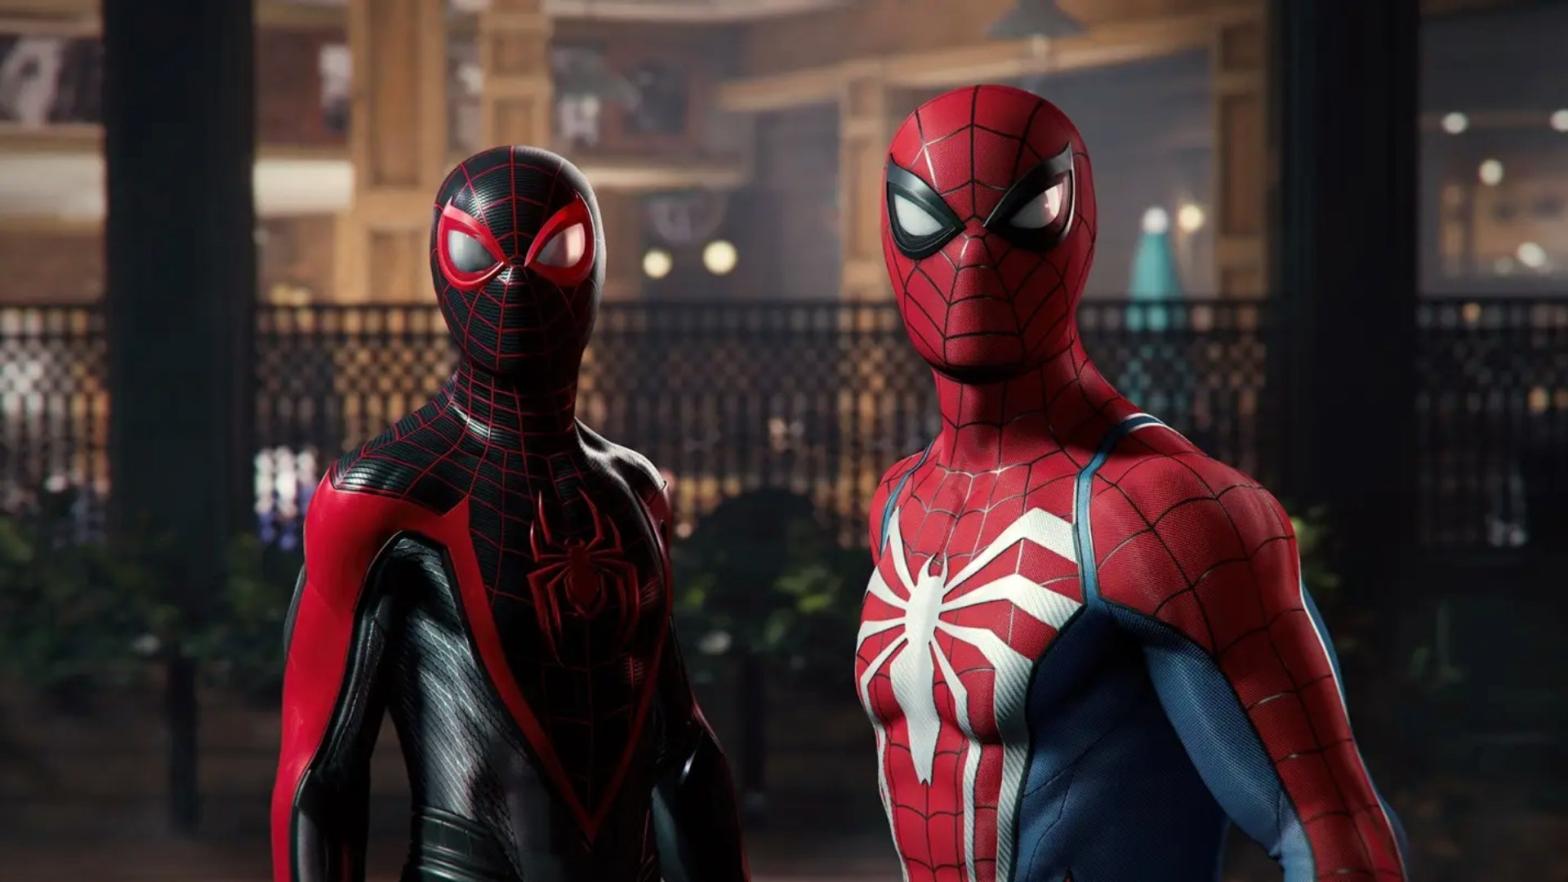 Their Spidey Senses are tingling. (Image: Insomniac Games)